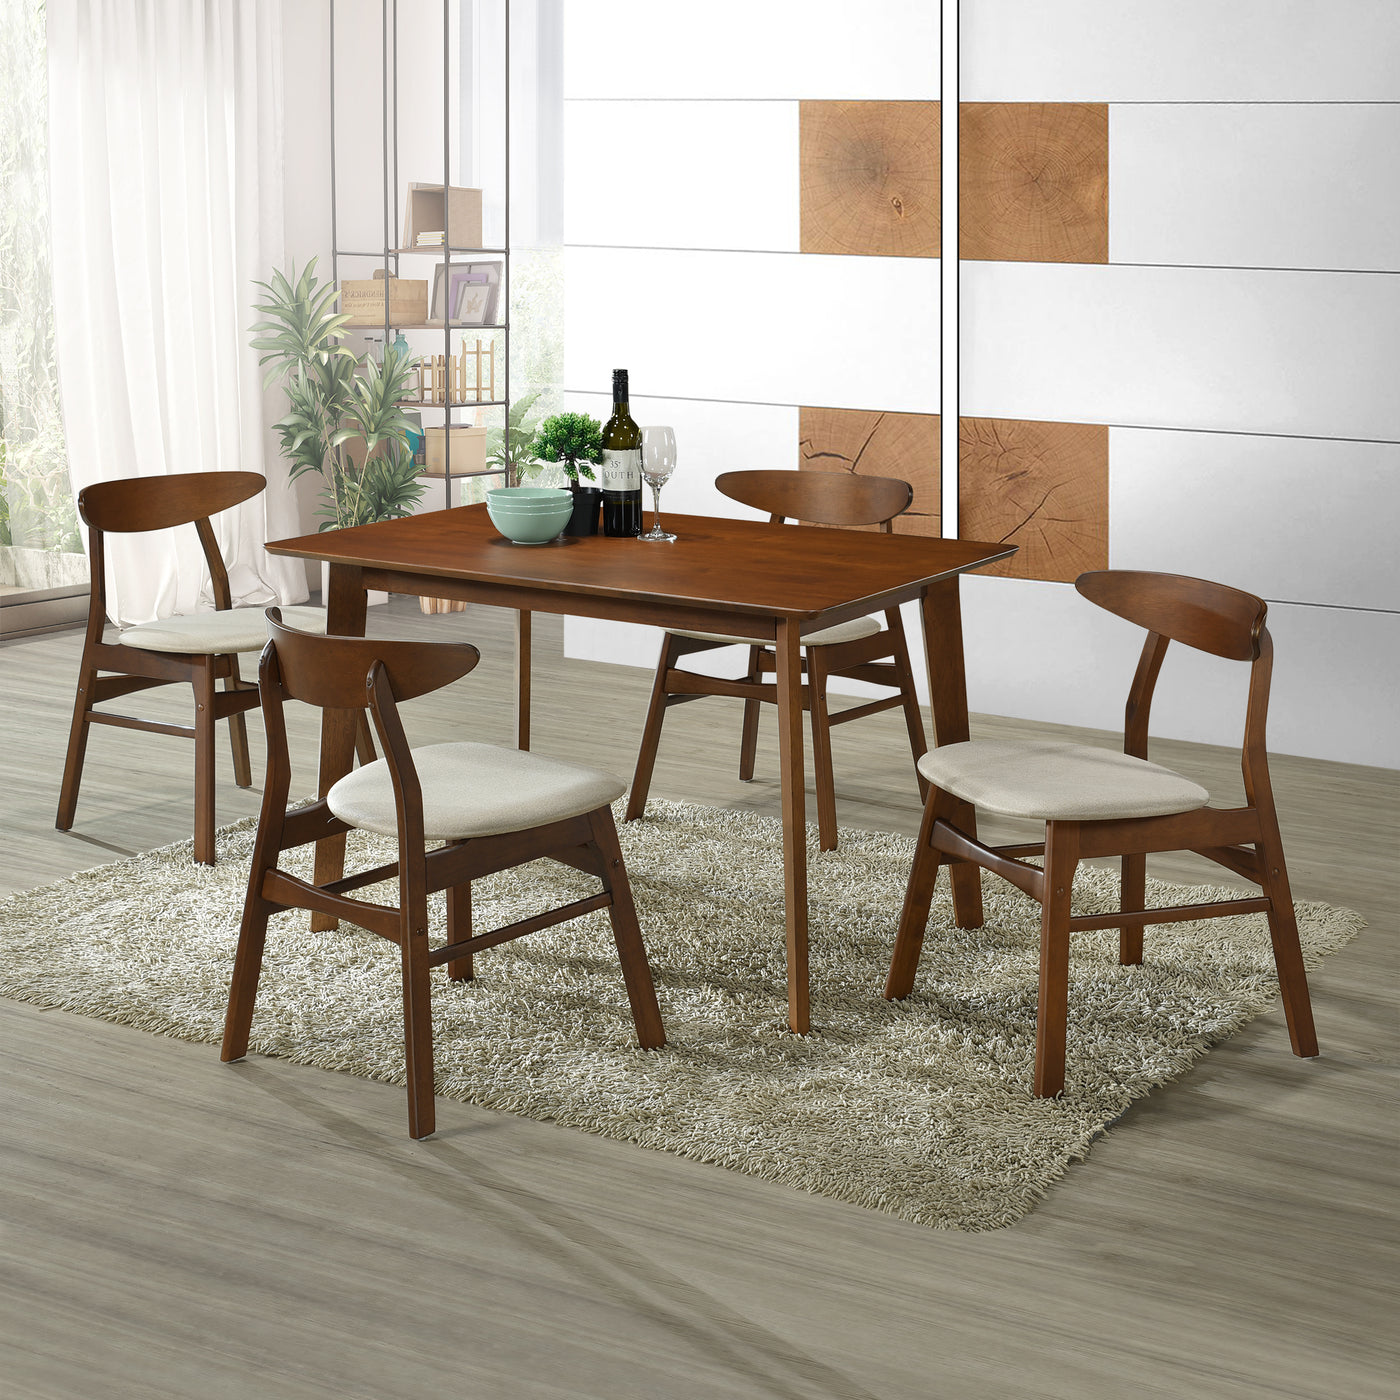 Lalia Mid Century Modern Solid Wood Upholstered Dining Side Chair (Set of 4)